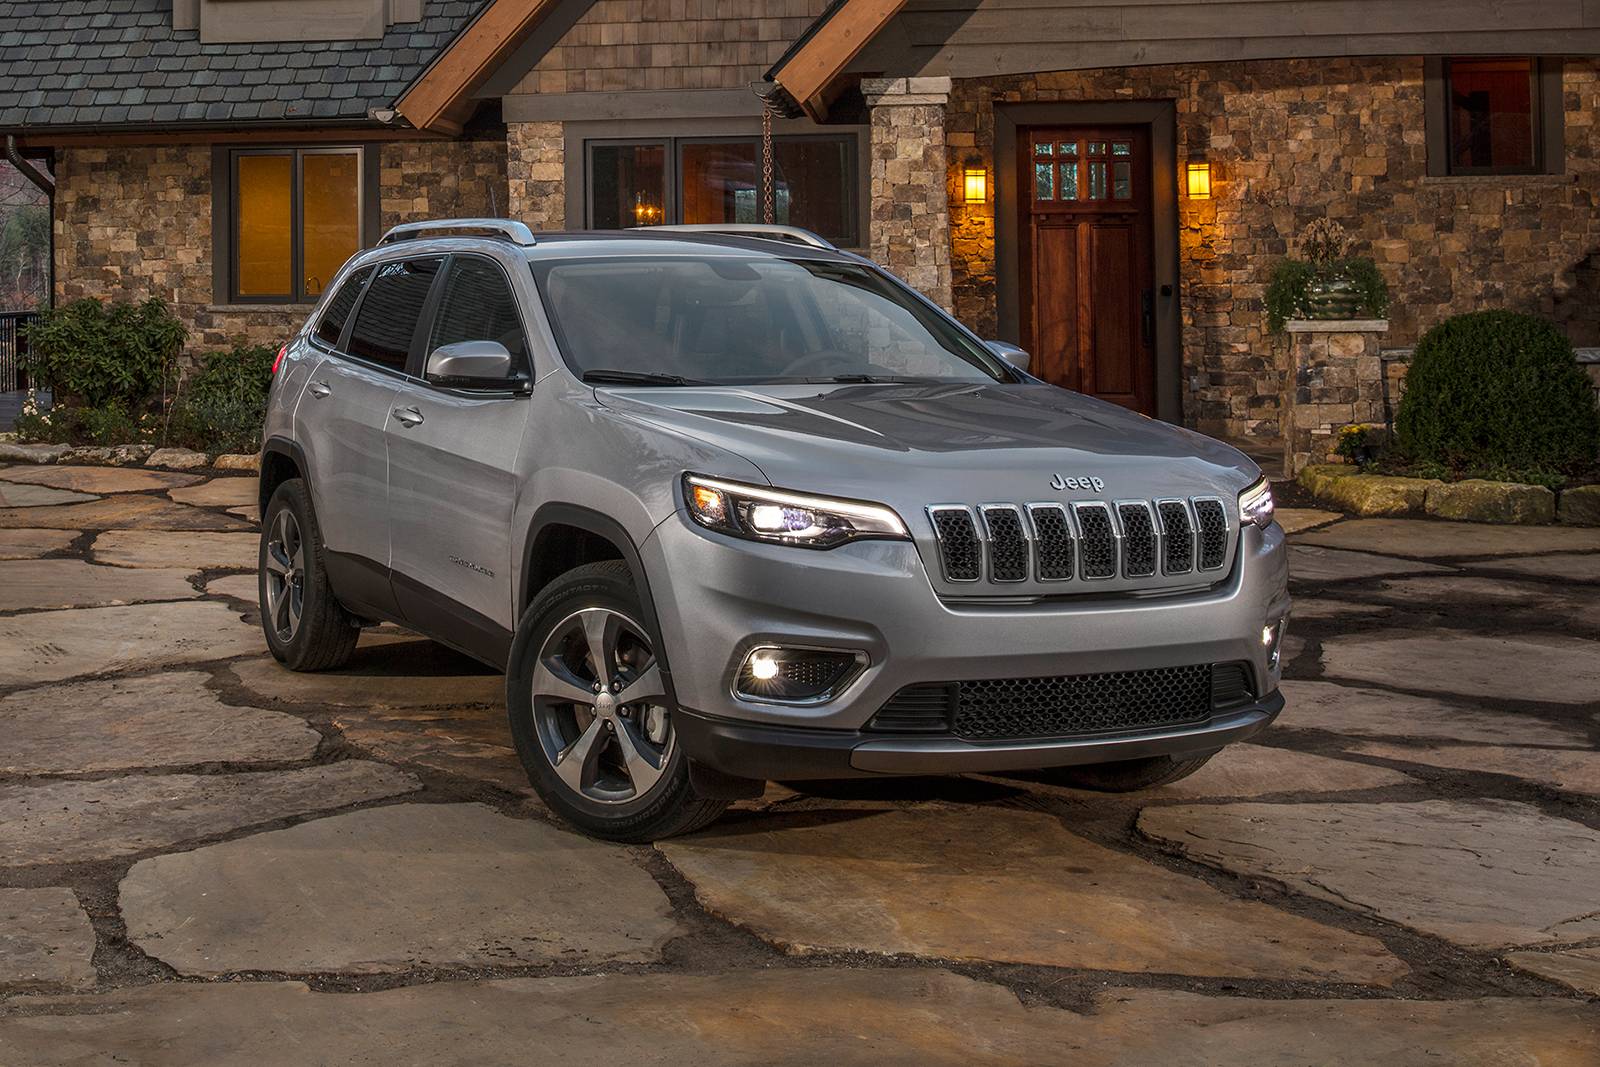 2020 Jeep Cherokee Review & Ratings | Edmunds